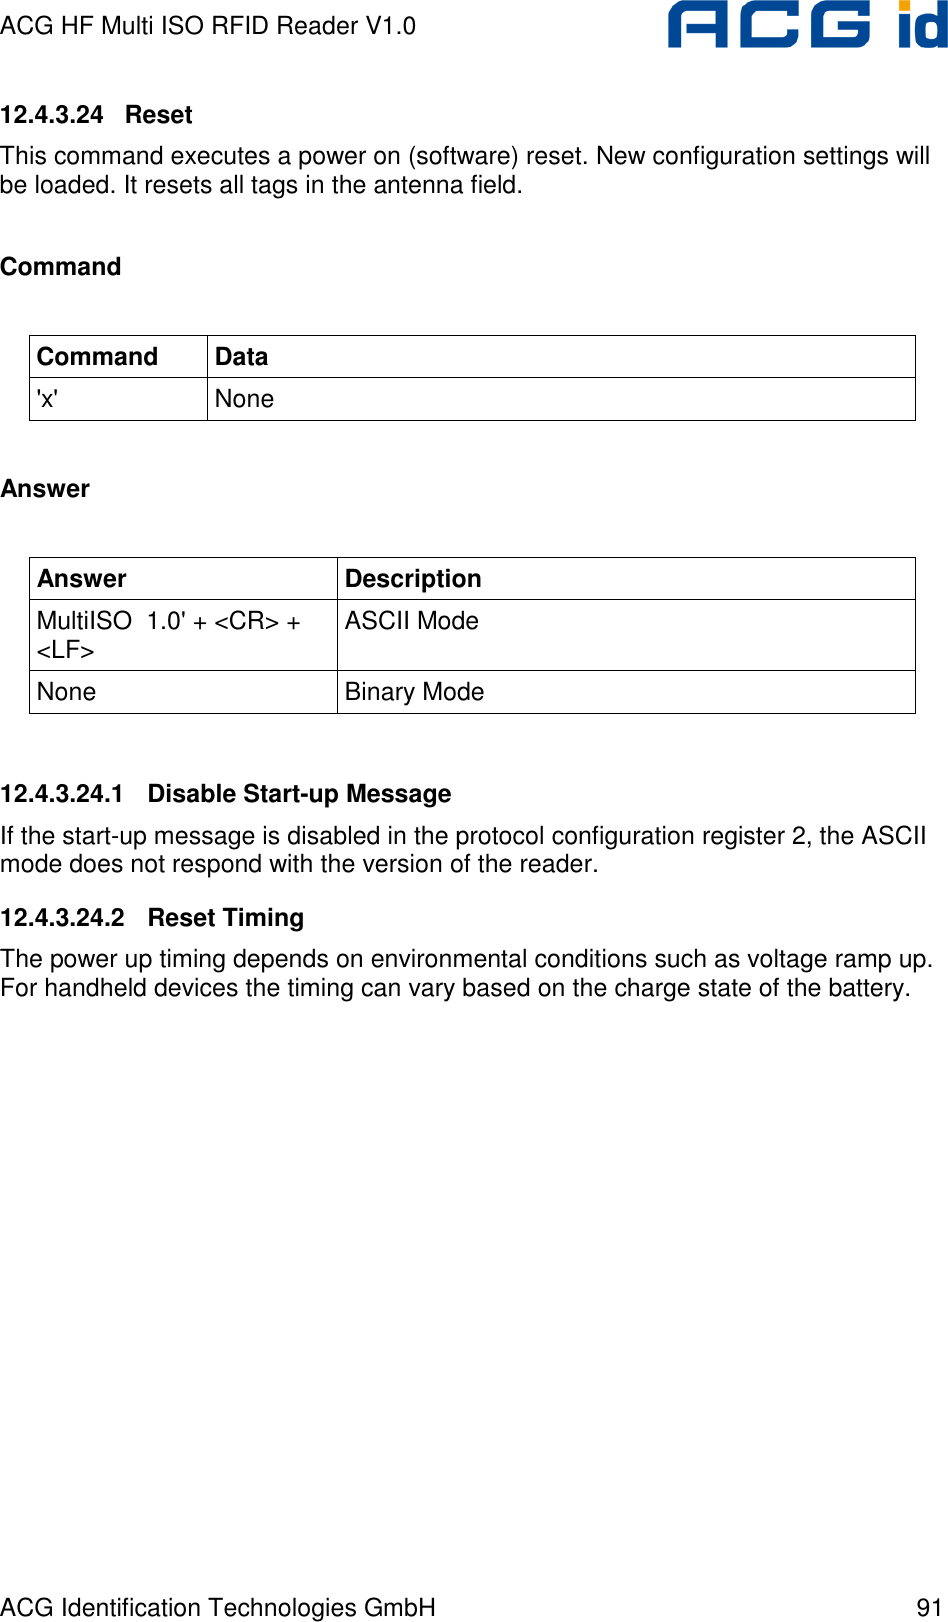 ACG HF Multi ISO RFID Reader V1.0 ACG Identification Technologies GmbH  91 12.4.3.24   Reset This command executes a power on (software) reset. New configuration settings will be loaded. It resets all tags in the antenna field.  Command  Command  Data &apos;x&apos;  None  Answer  Answer  Description MultiISO  1.0&apos; + &lt;CR&gt; + &lt;LF&gt;  ASCII Mode None  Binary Mode  12.4.3.24.1  Disable Start-up Message If the start-up message is disabled in the protocol configuration register 2, the ASCII mode does not respond with the version of the reader. 12.4.3.24.2  Reset Timing The power up timing depends on environmental conditions such as voltage ramp up. For handheld devices the timing can vary based on the charge state of the battery. 